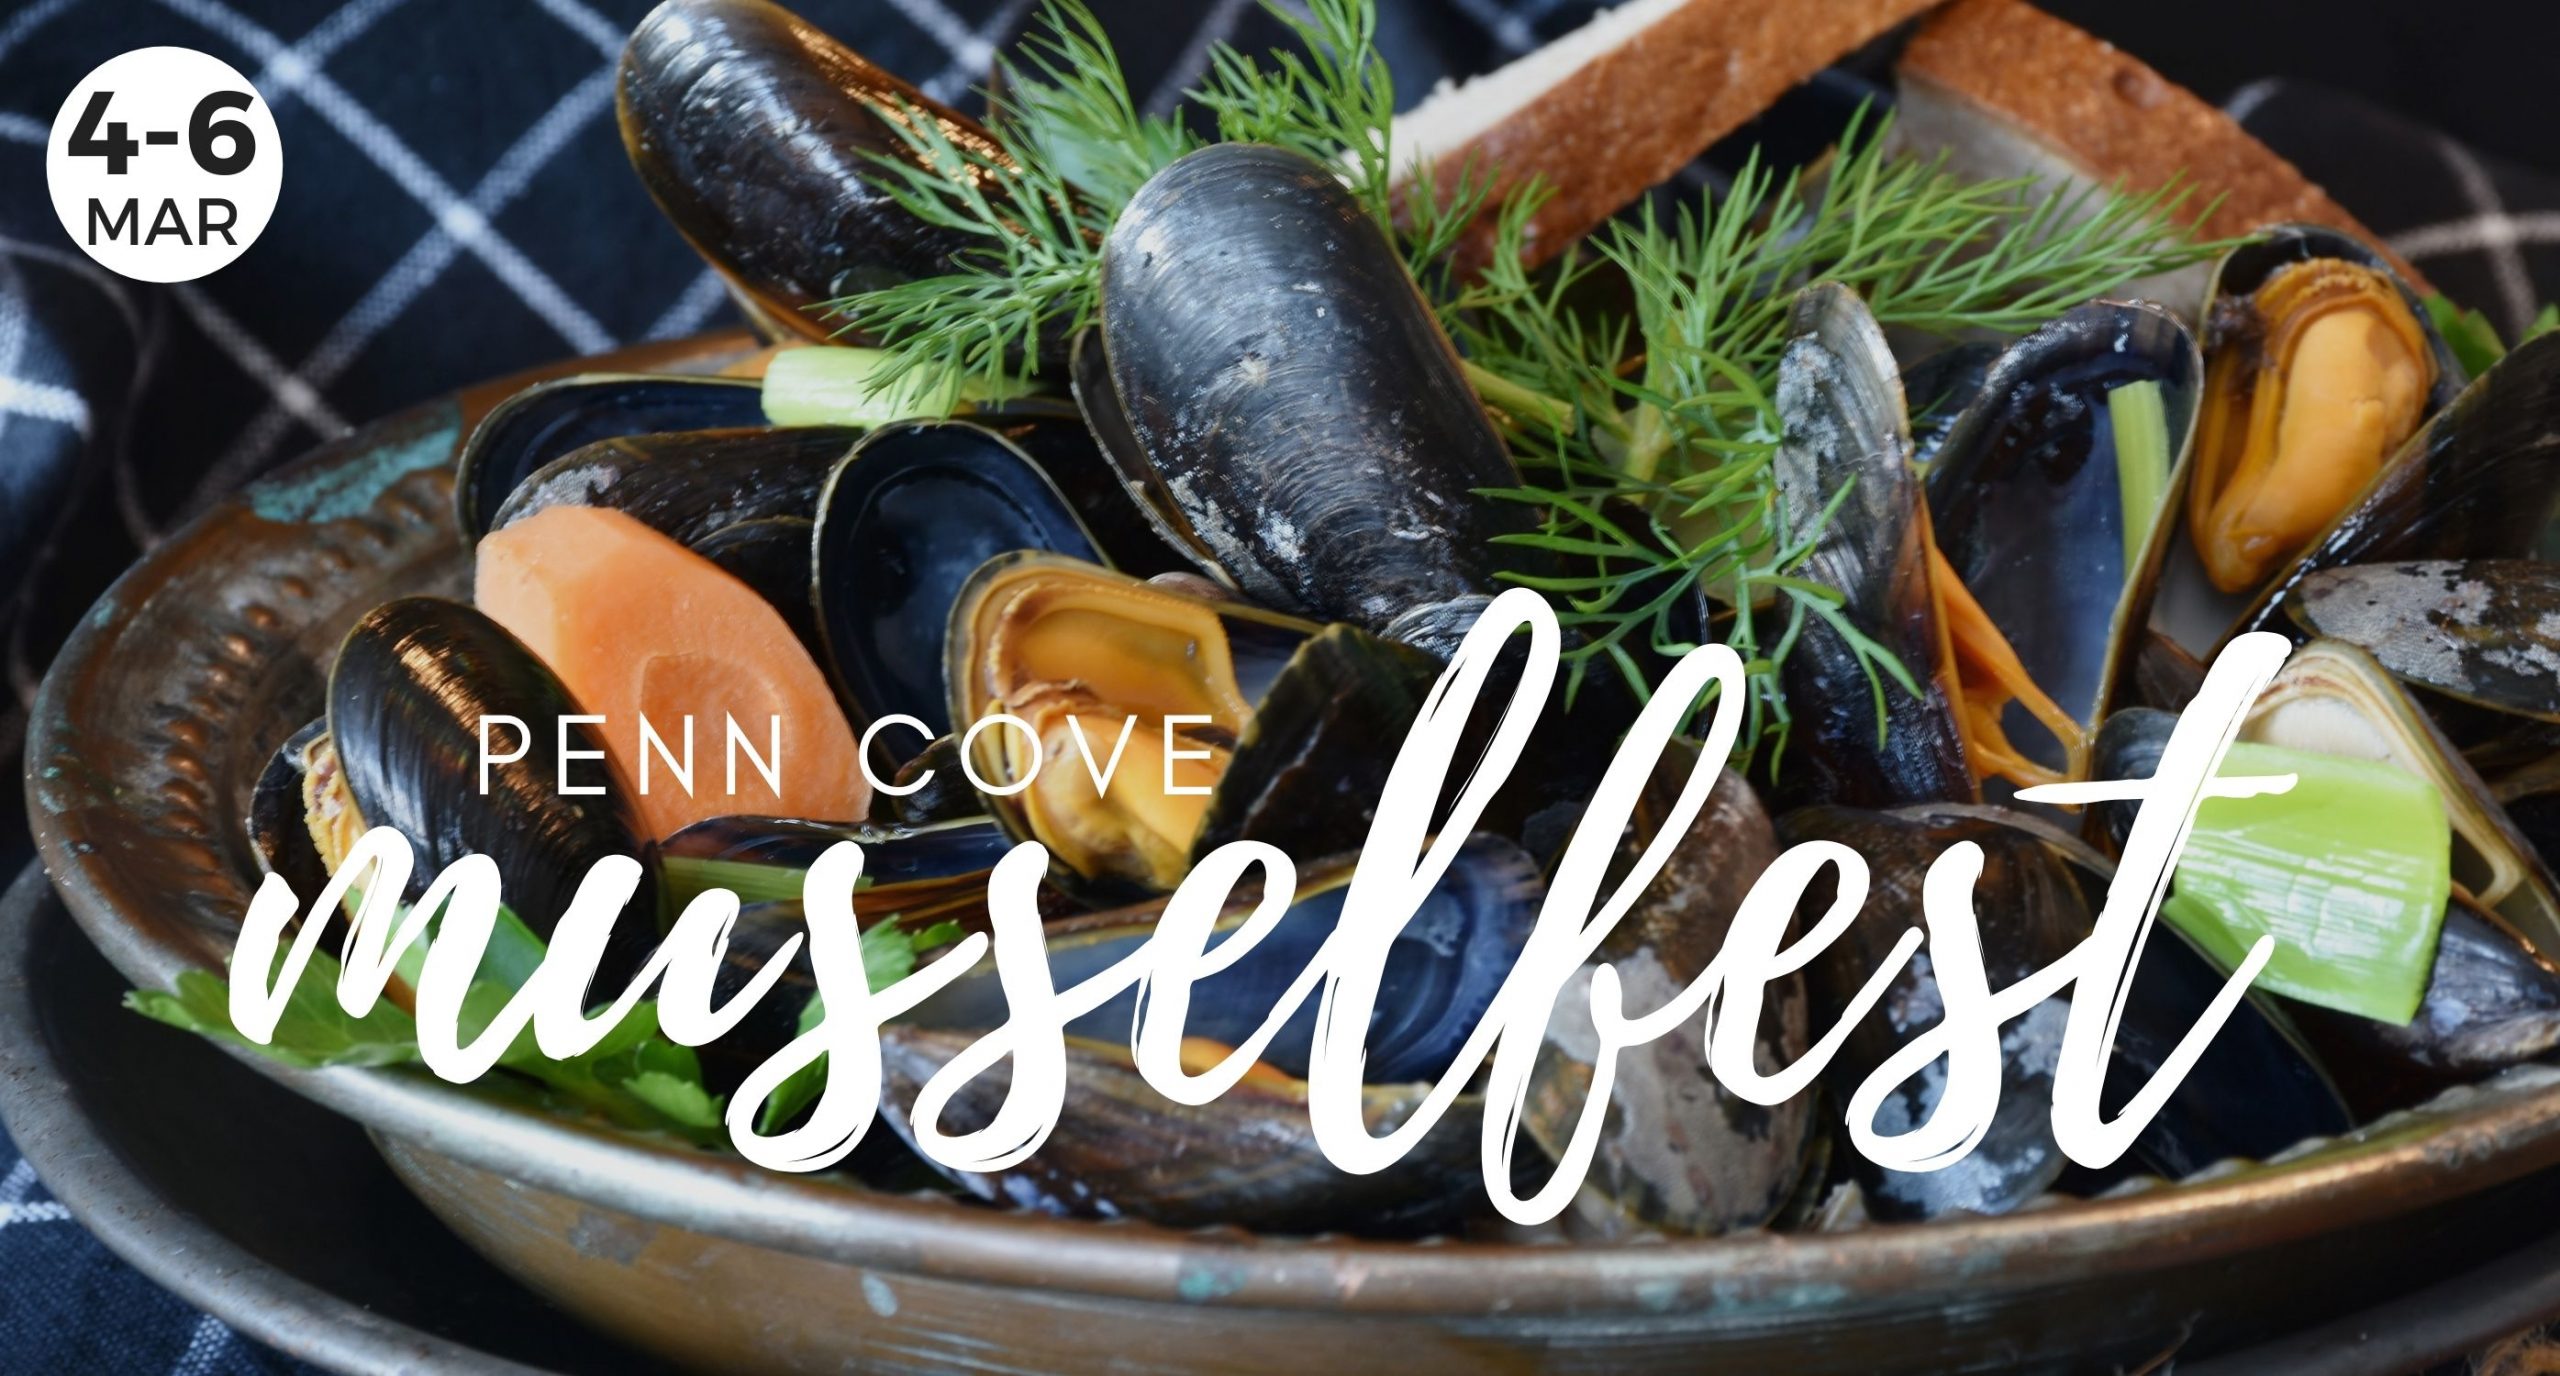 Penn Cove Musselfest Whidbey Island